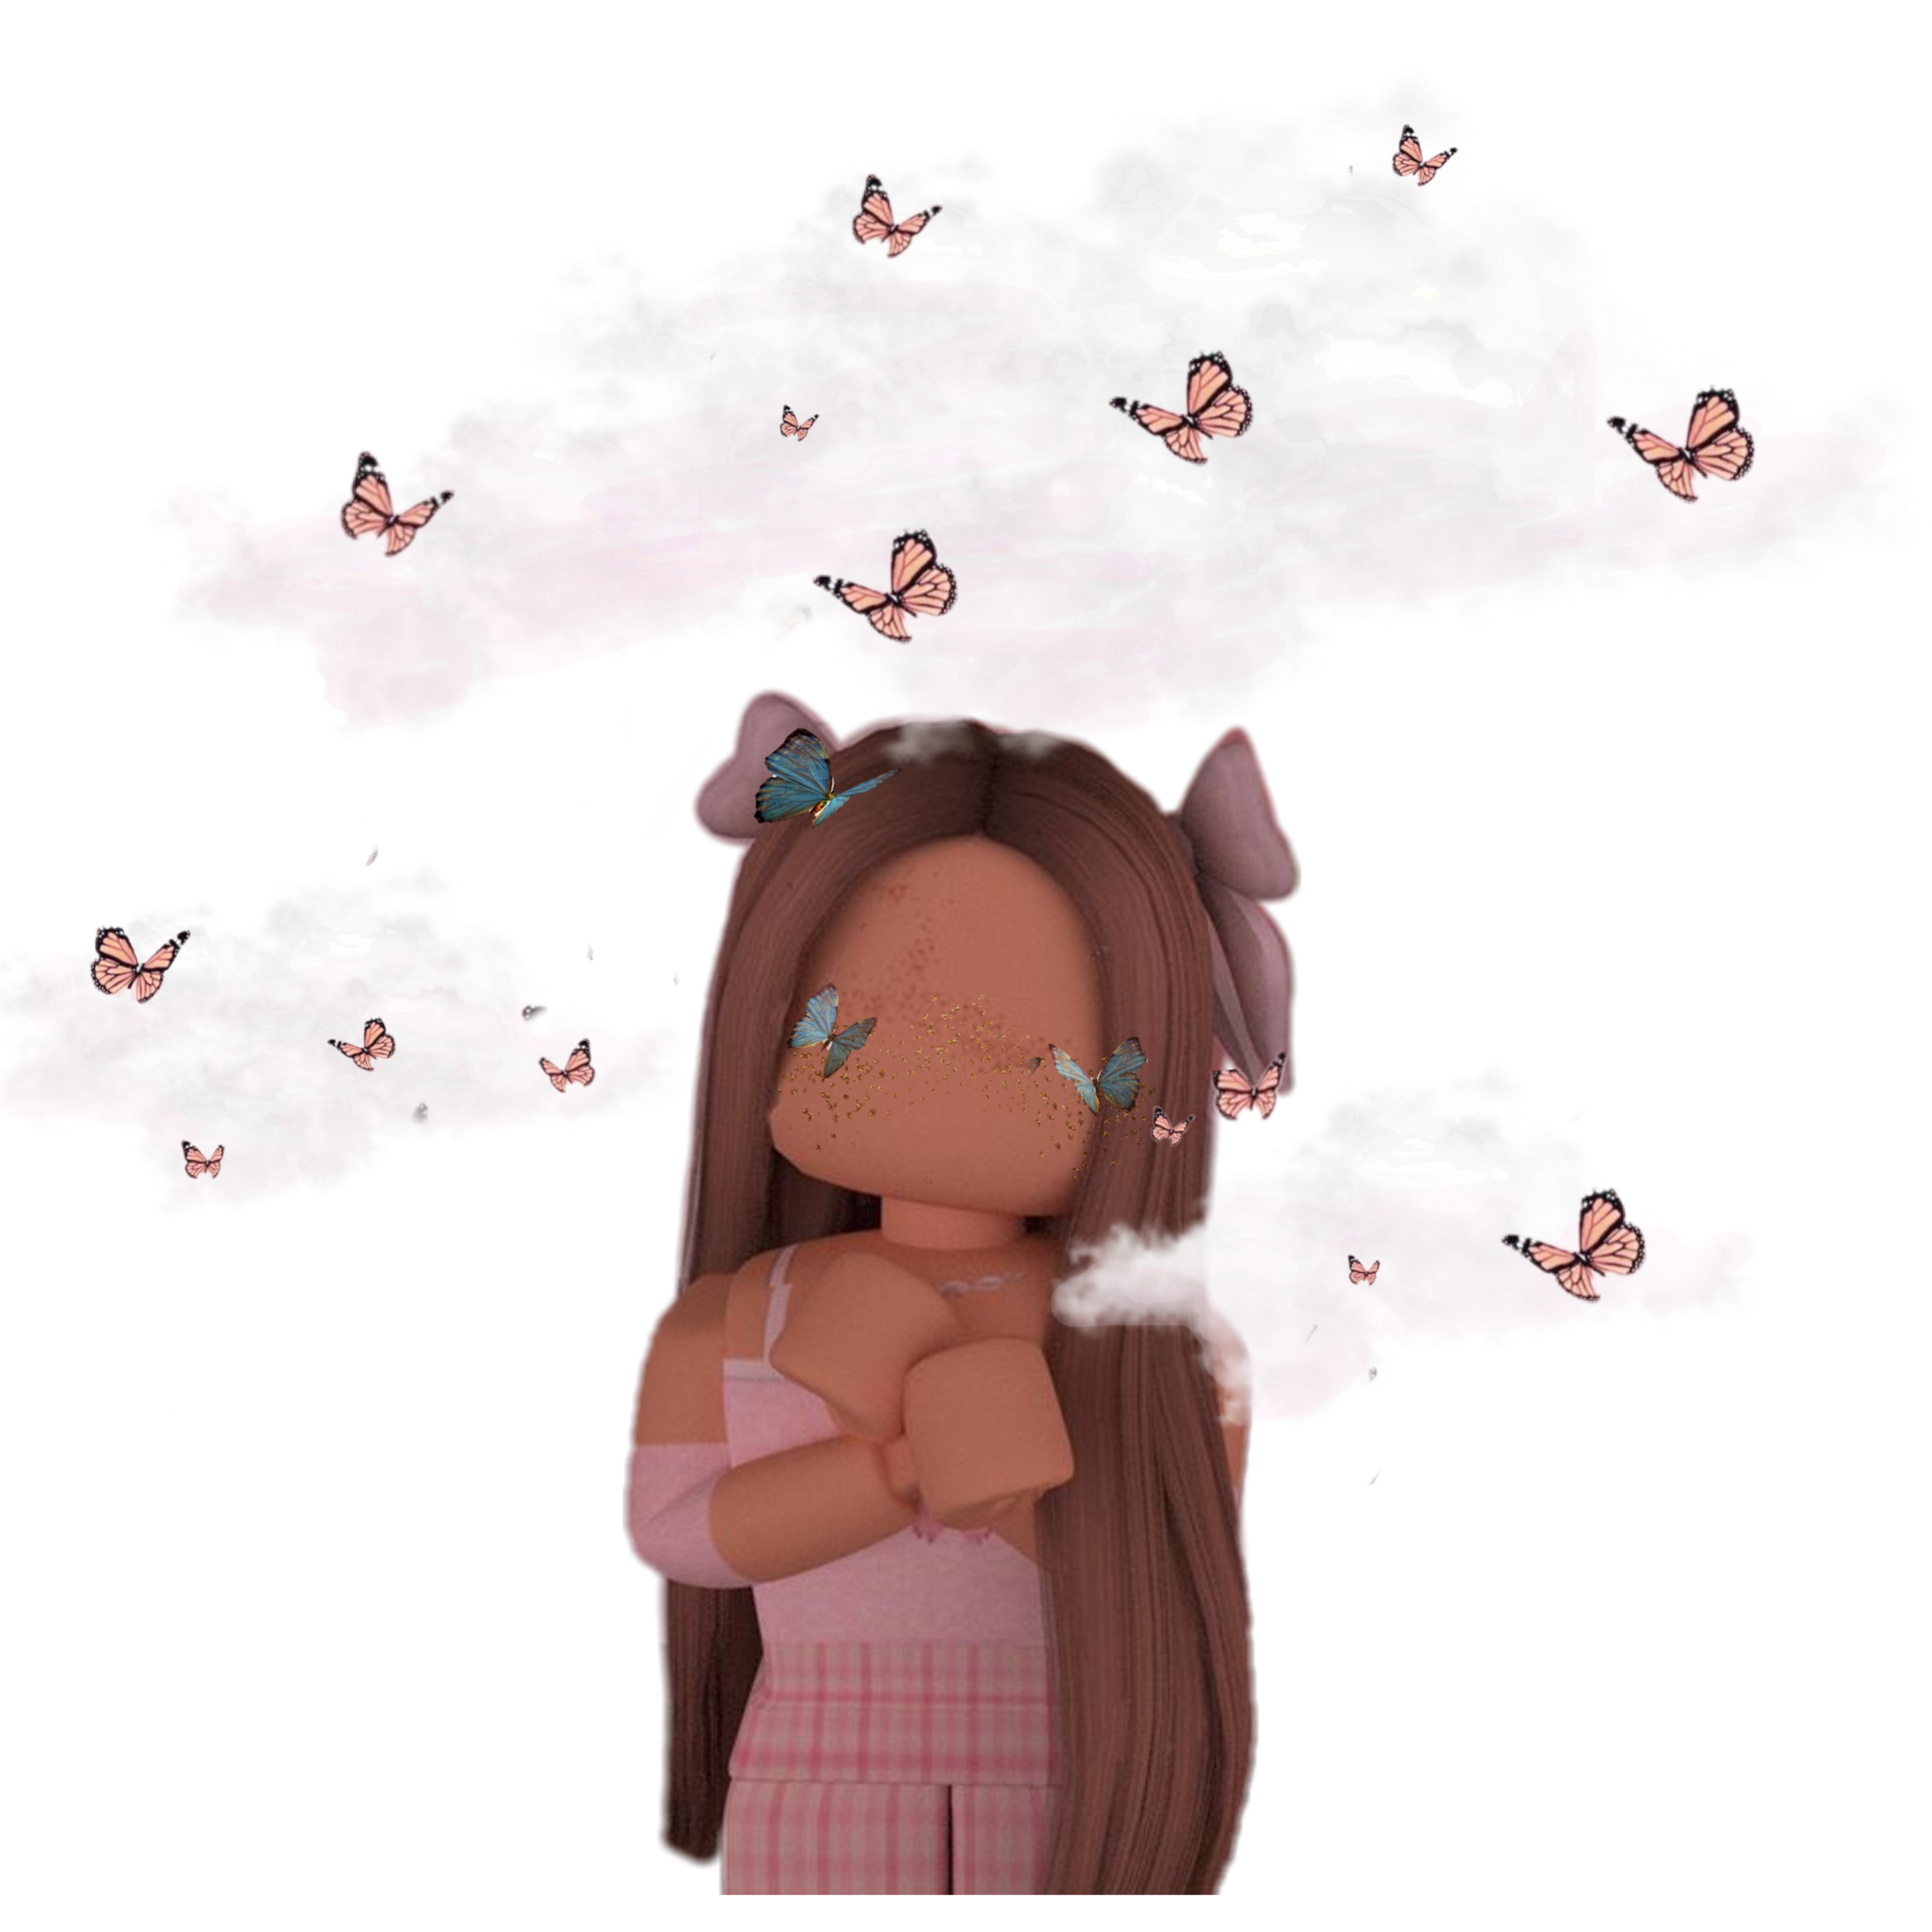 Sticker By 𝒜ℯ𝓈𝓉𝒽ℯ𝓉𝒾𝒸𝓈 By 𝓁ℯ𝓍𝒾 - robloxgirl roblox aesthetic sticker by aesthetics